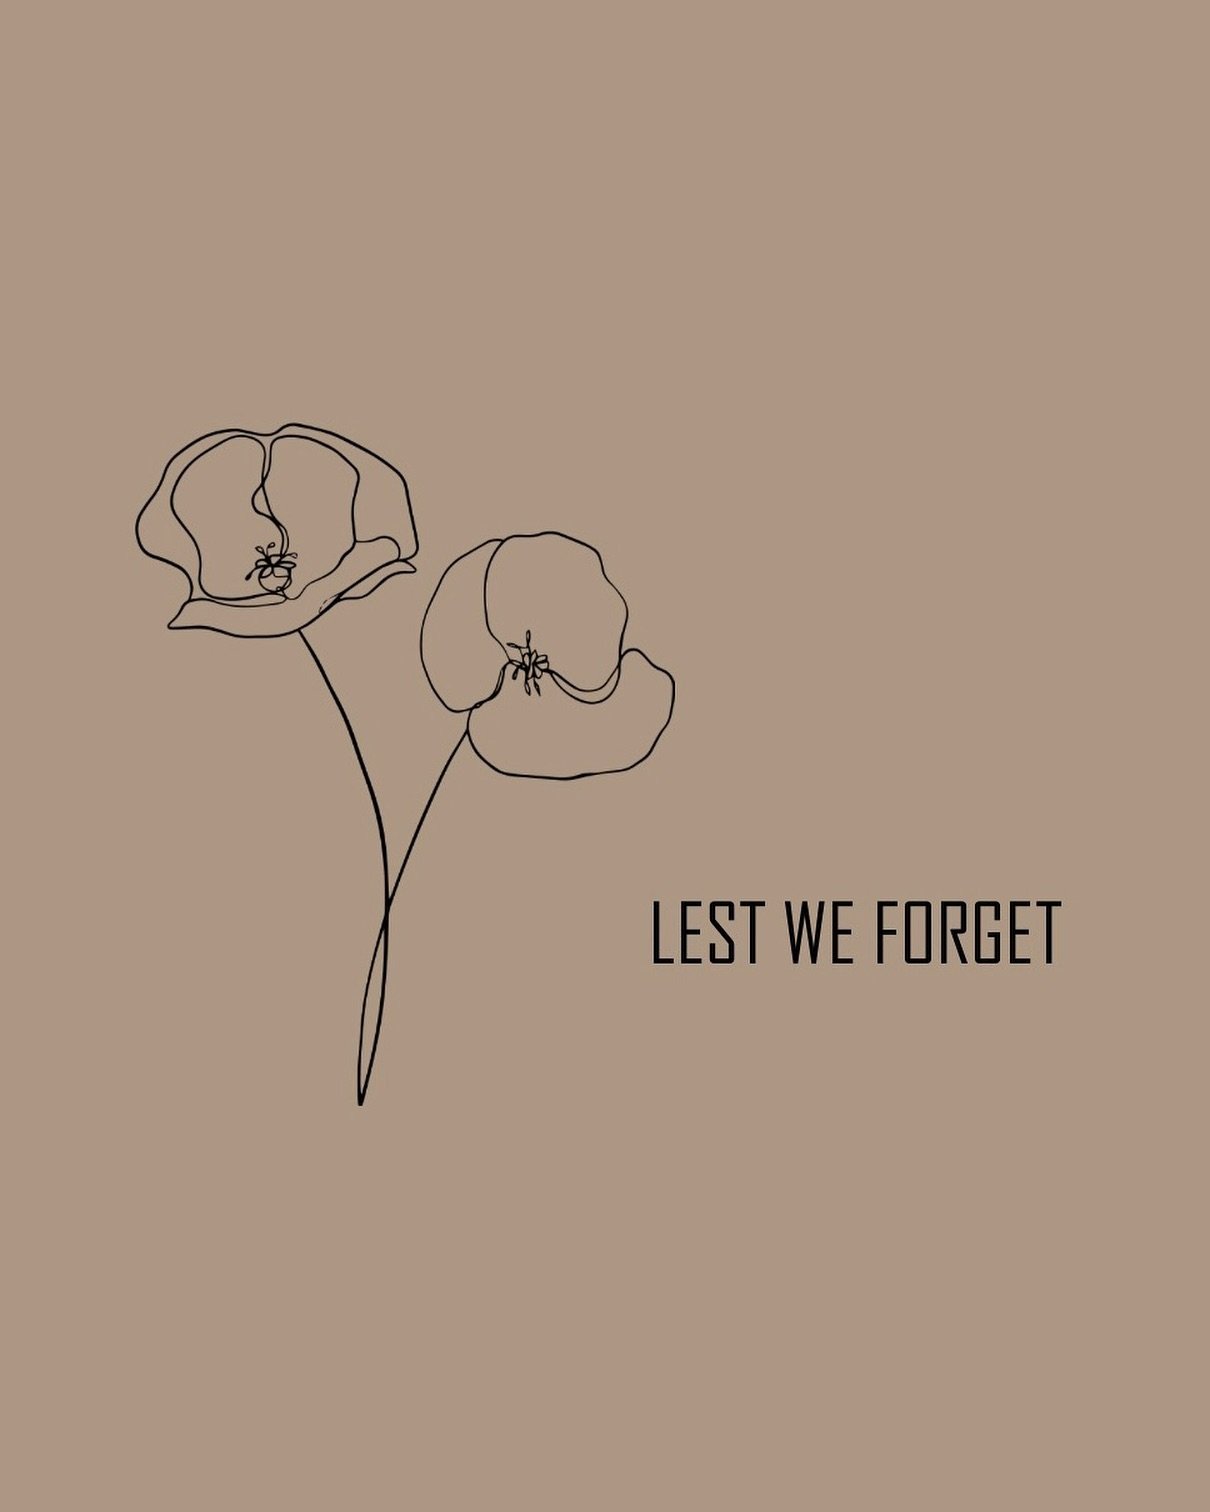 Shorehouse pays tribute to all the sacrifices made by our ANZAC veterans. 
Lest we forget ❤️